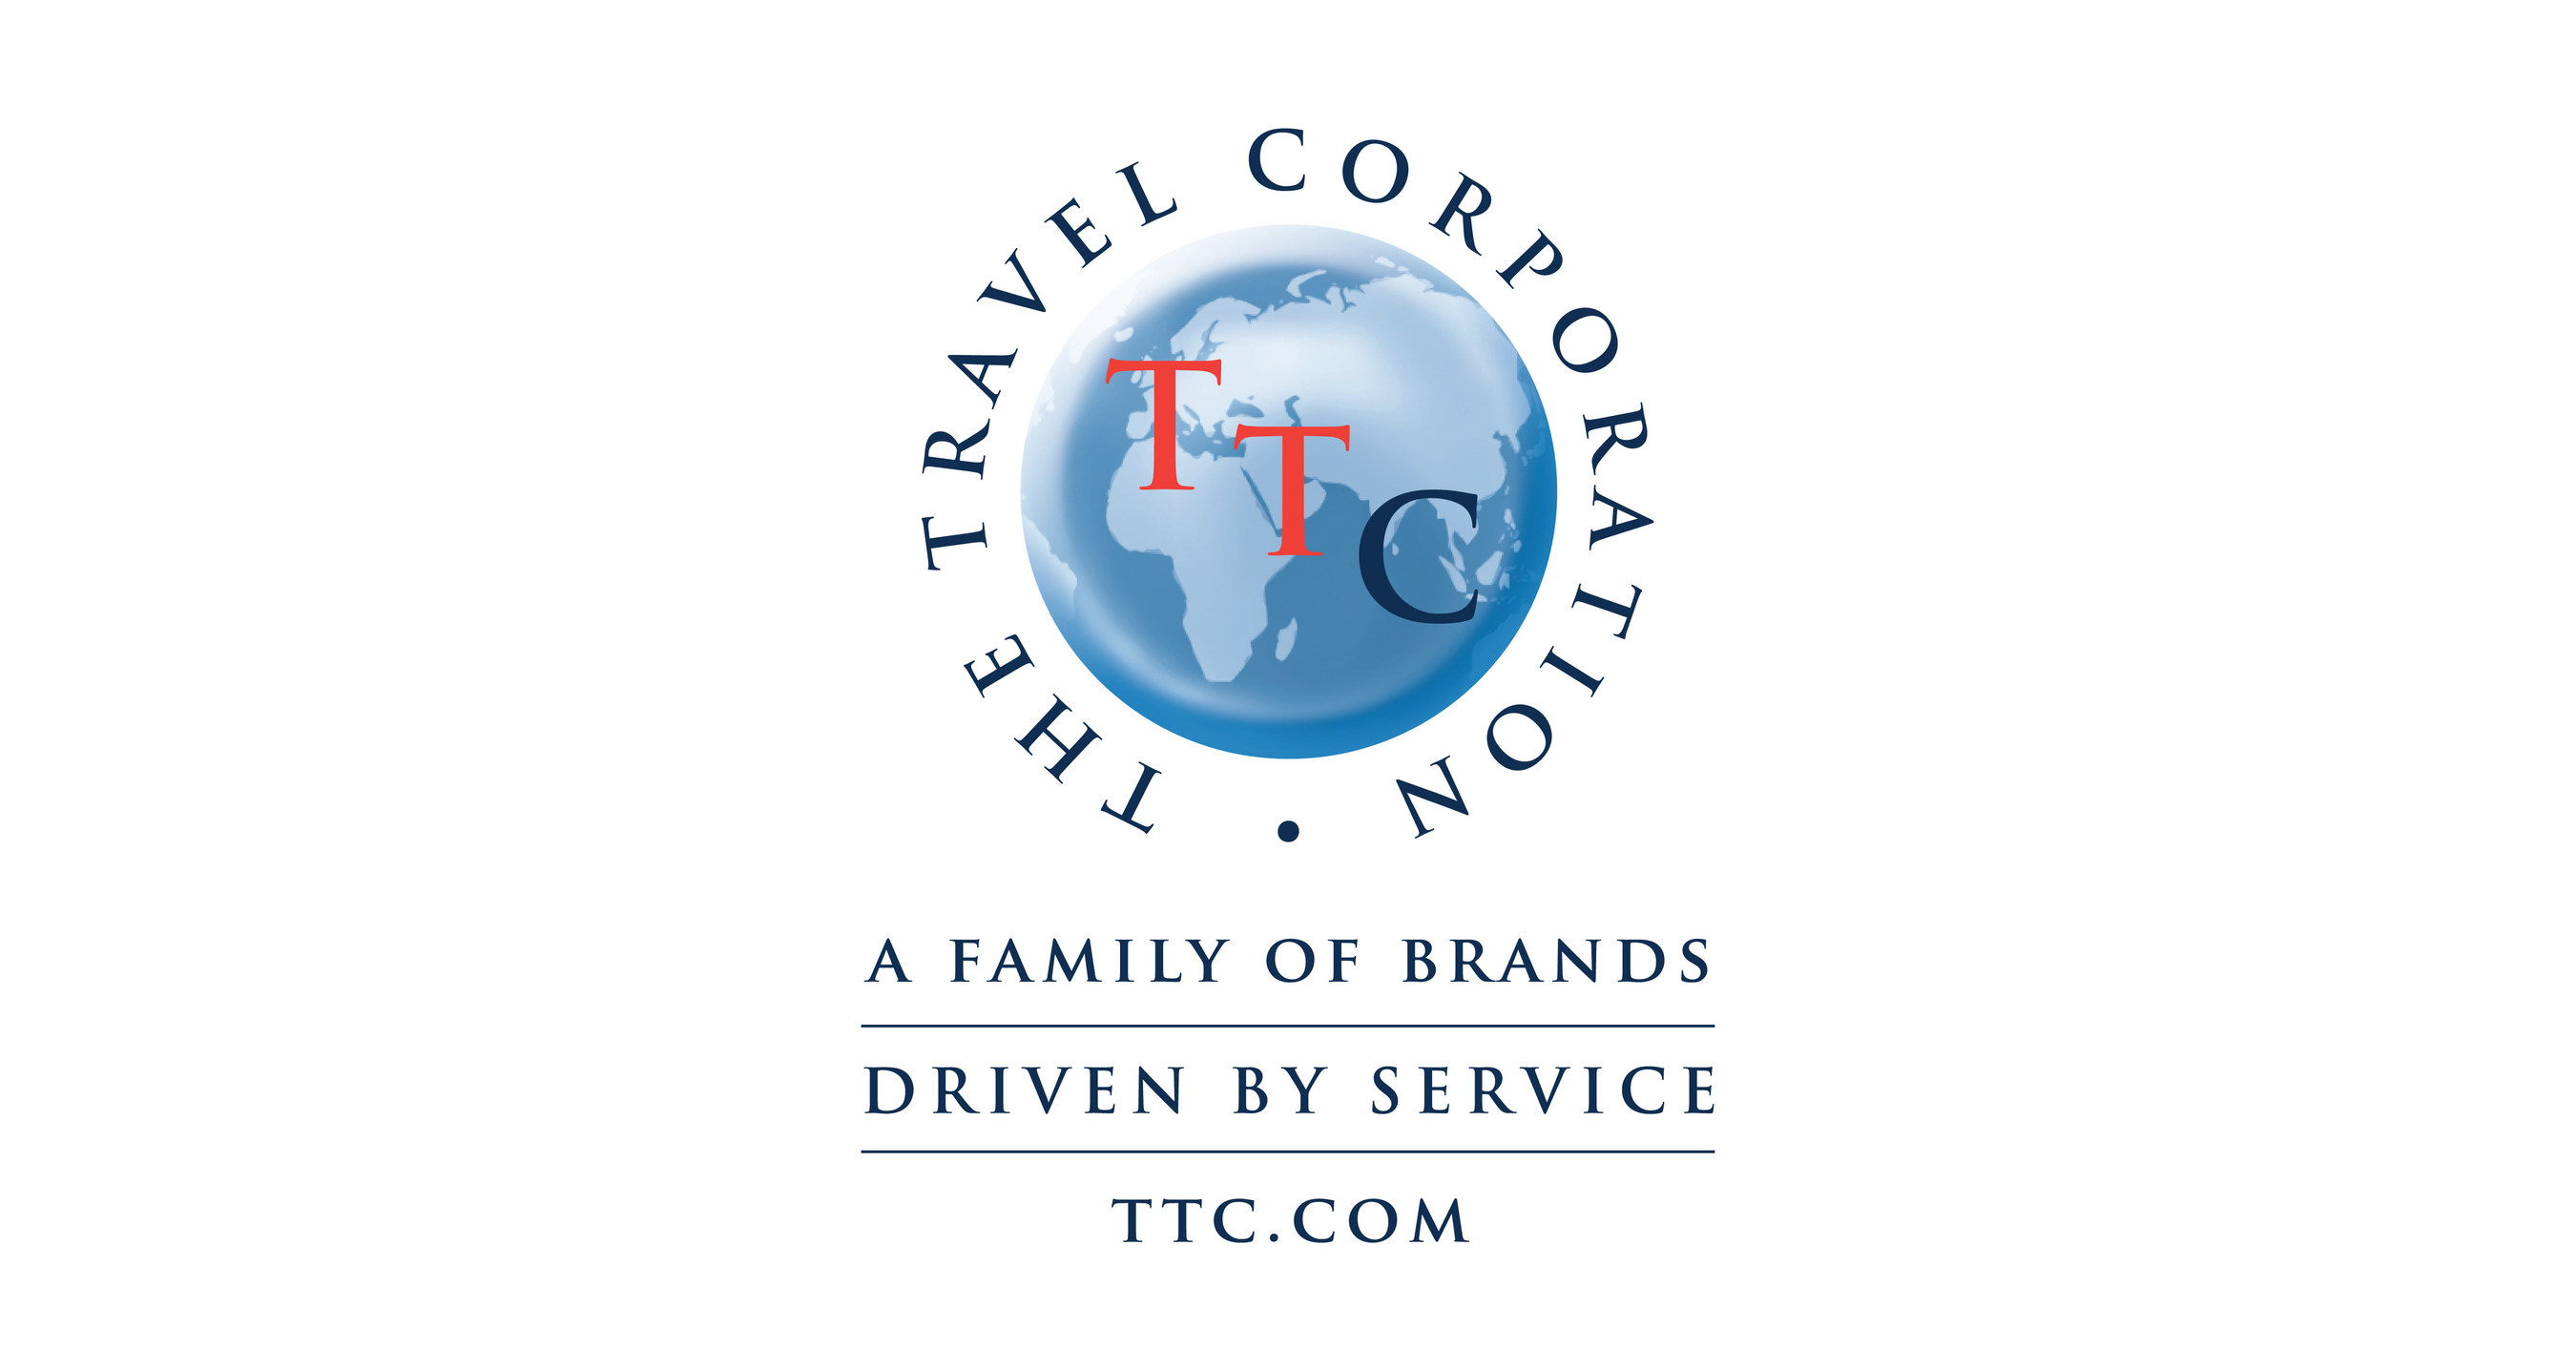 br travel corp